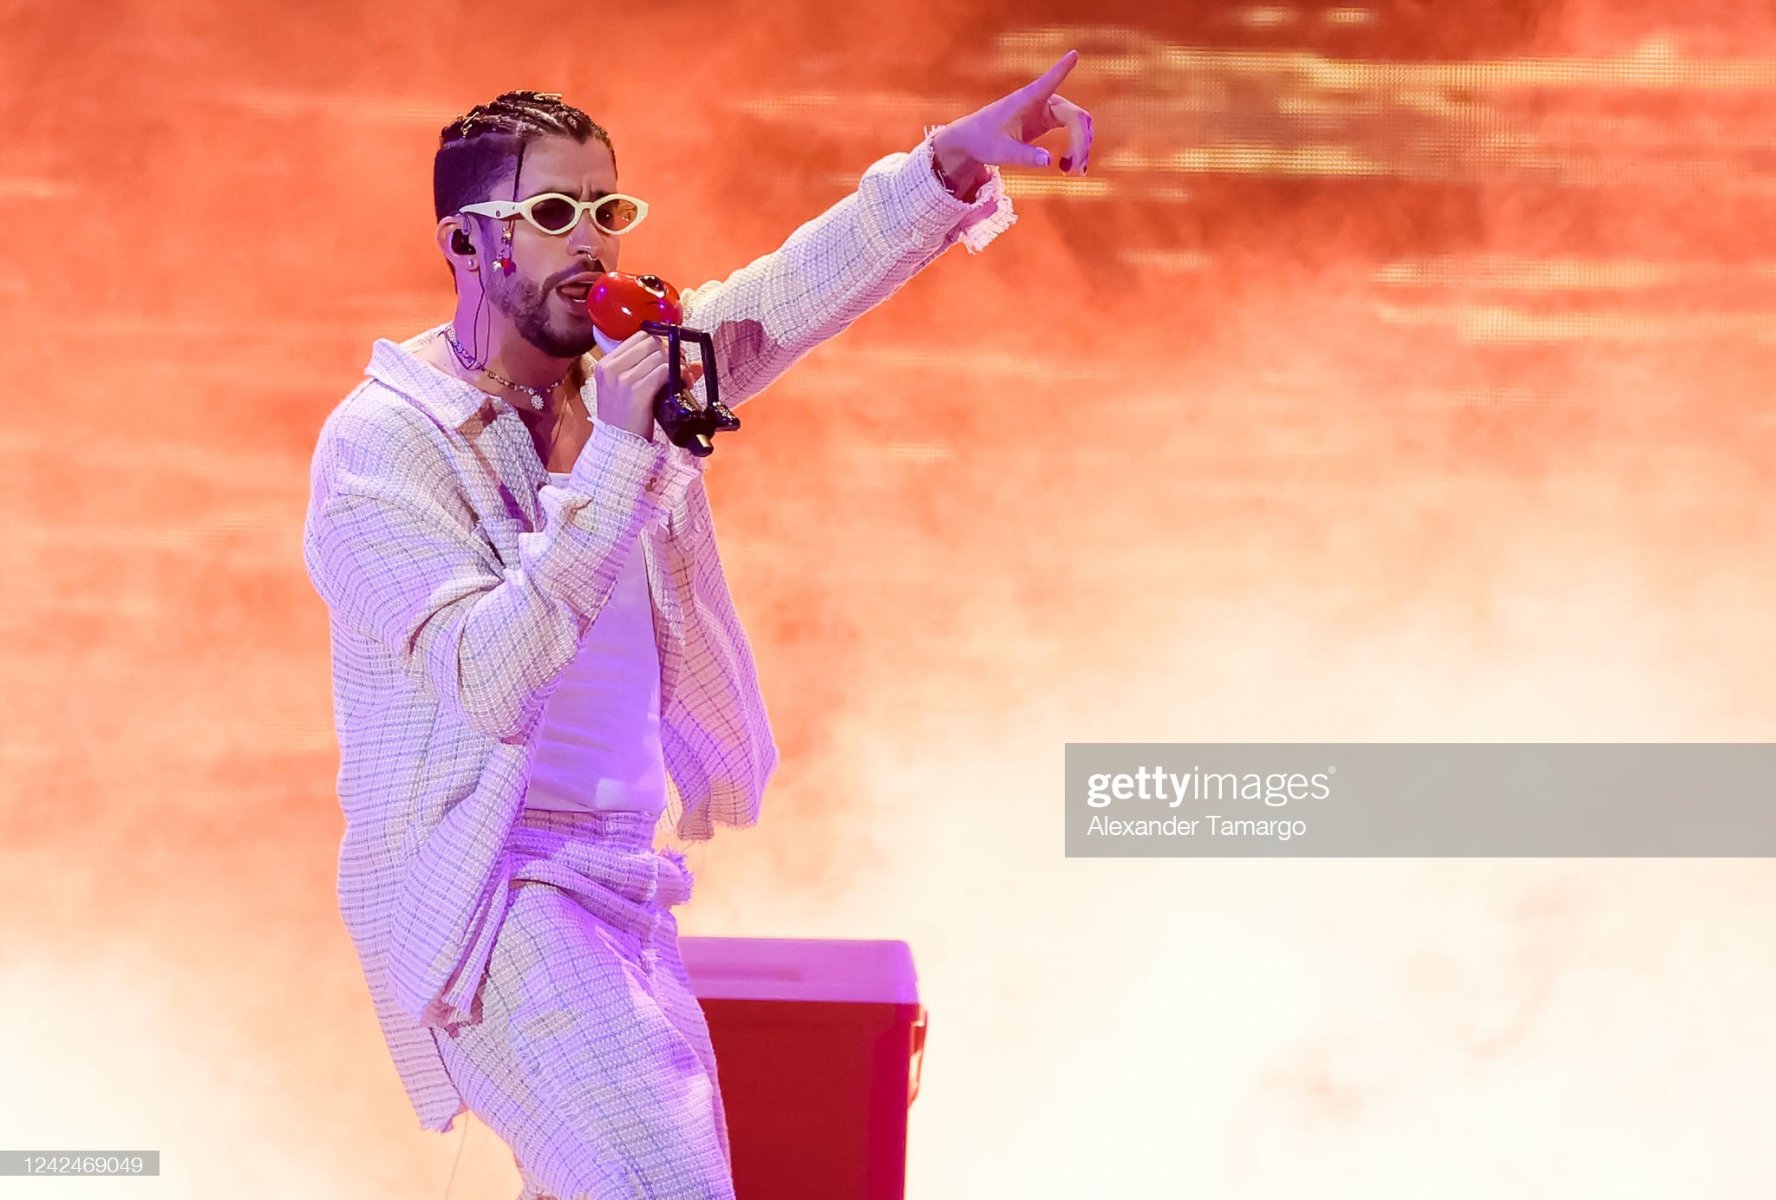 MIAMI GARDENS, FL - AUGUST 12: Bad Bunny performs on stage during his World's Hottest Tour at Hard Rock Stadium on August 12, 2022 in Miami Gardens, Florida.  (Photo by Alexander Tamargo/Getty Images)